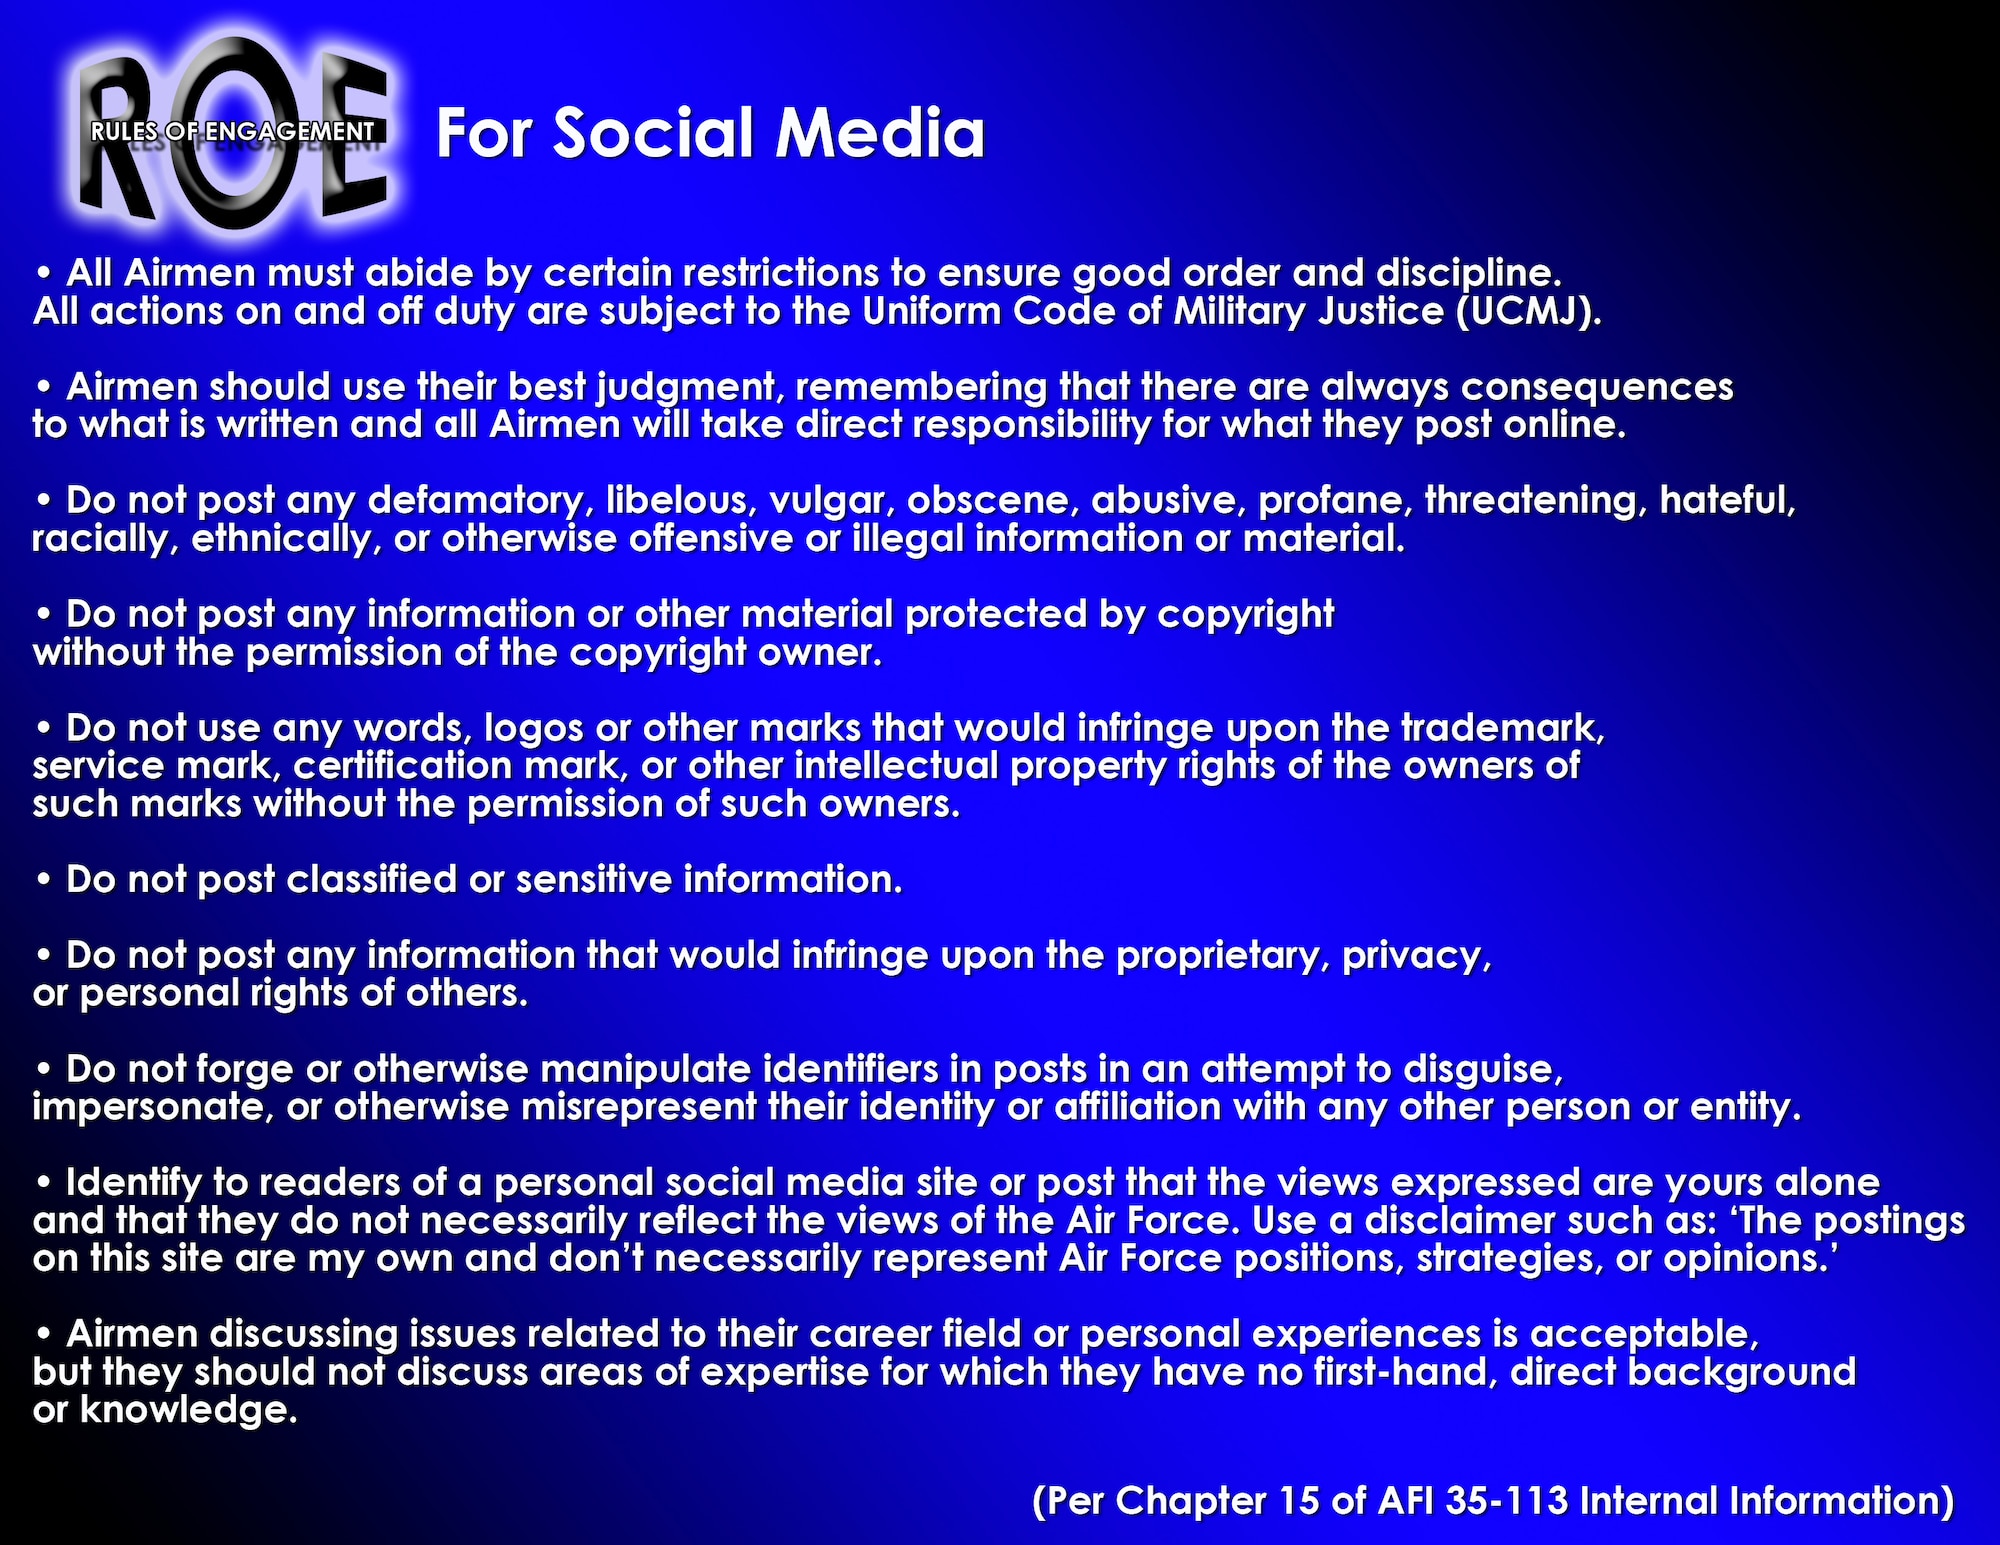 Later in April, all Air Force personnel will be allowed to utilize Internet-based social media sites via the AFNET for official use and limited personal use. All Airmen must use due diligence when posting information online and must always follow Joint Ethics regulations, OPSEC and the above rules of engagement. (U.S. Air Force graphic)